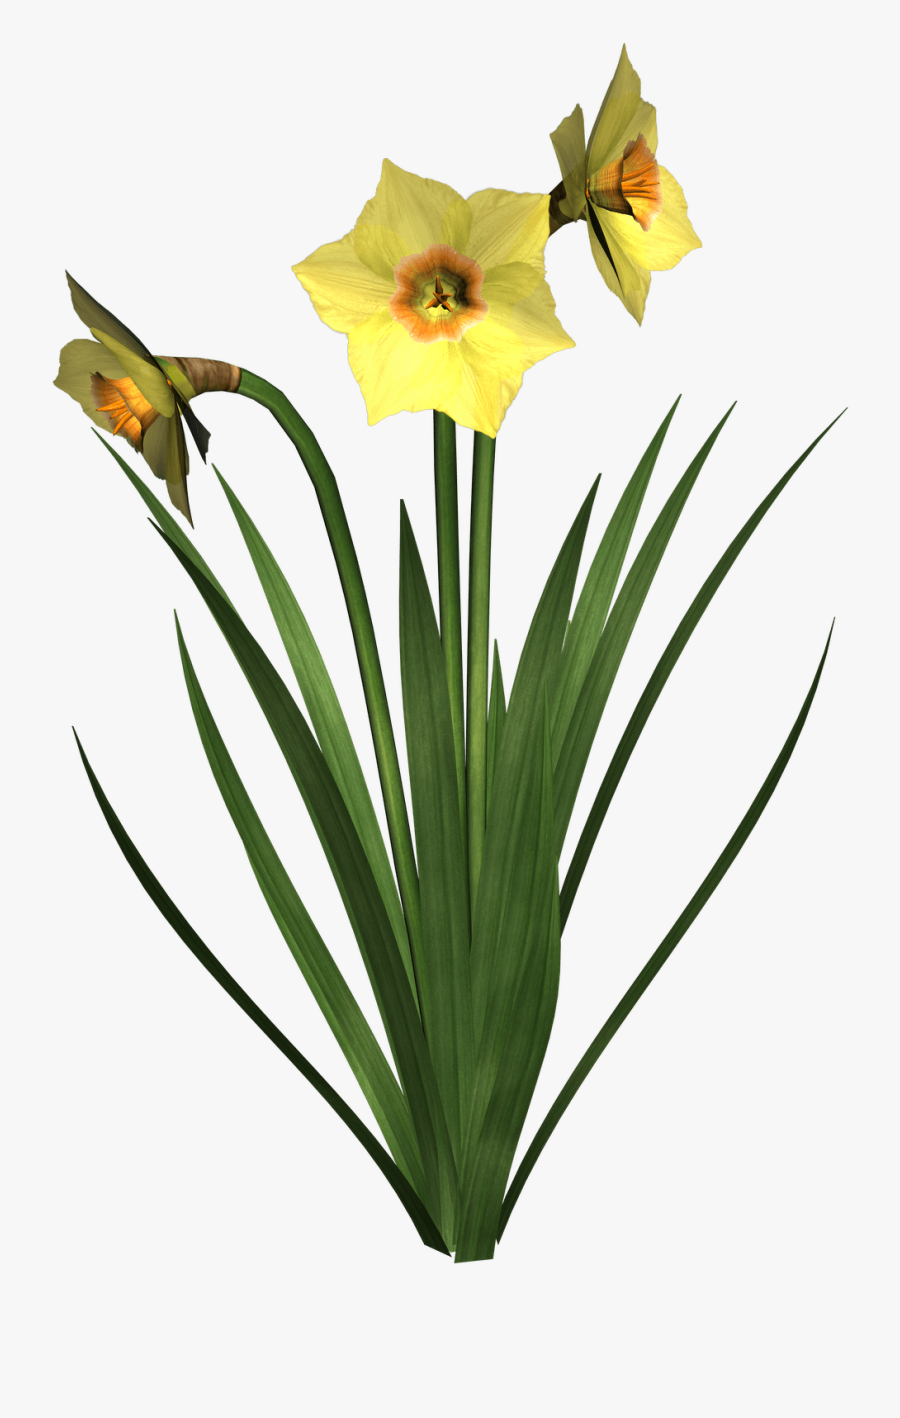 Daffodil Clipart Free - Flower Plant Transparent Background, Transparent Clipart